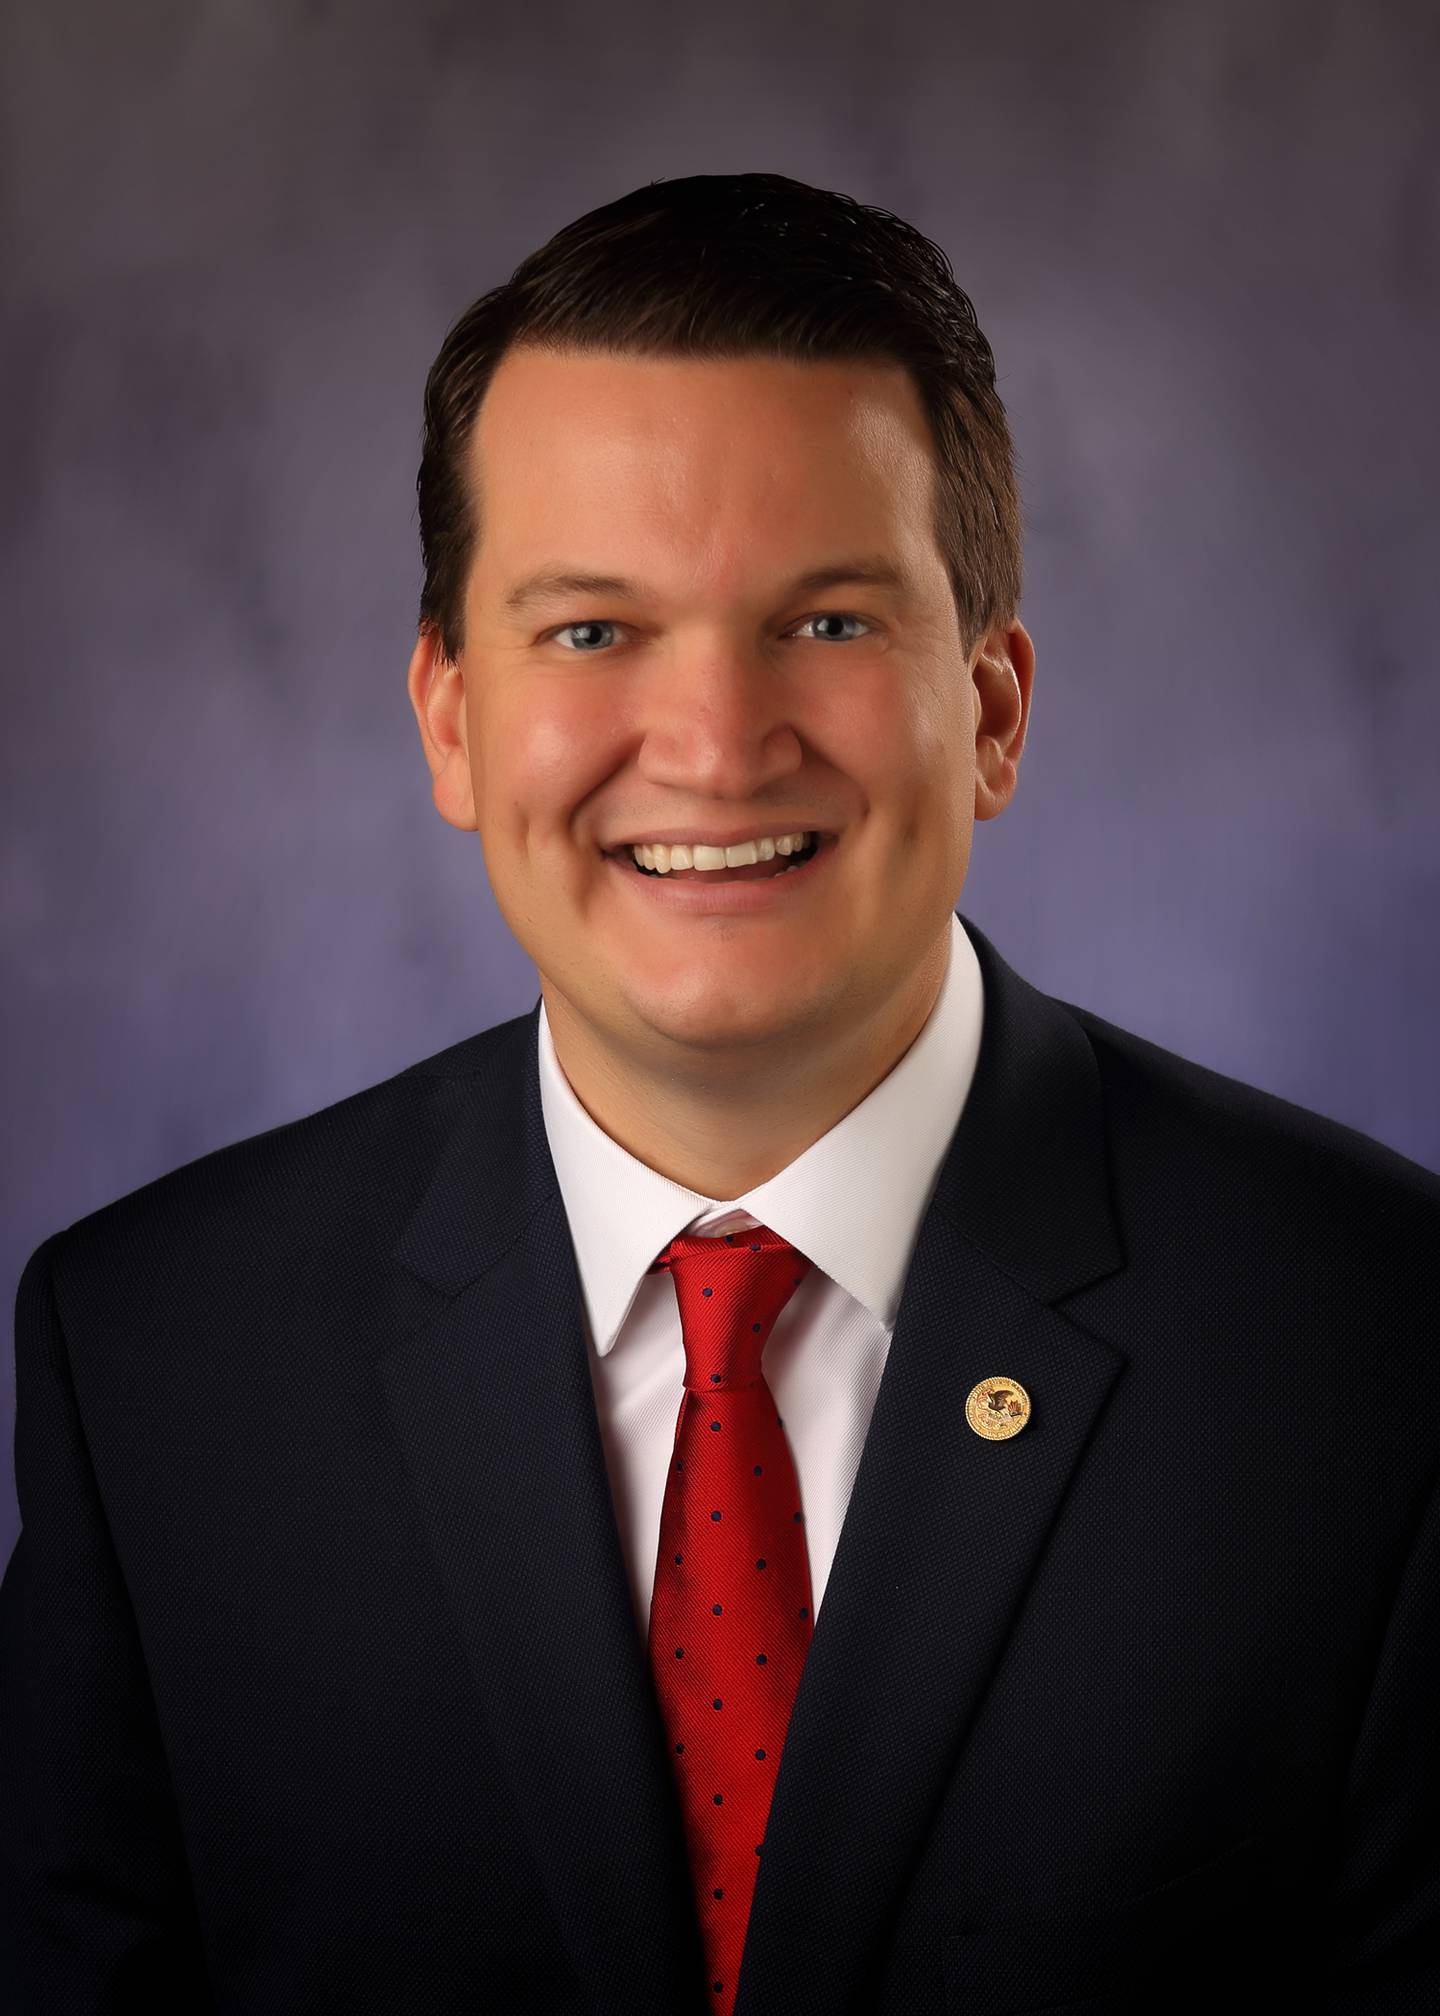 Andrew Chesney, twice-elected to the state House of Representatives, will seek the state 45th District state Senate seat.